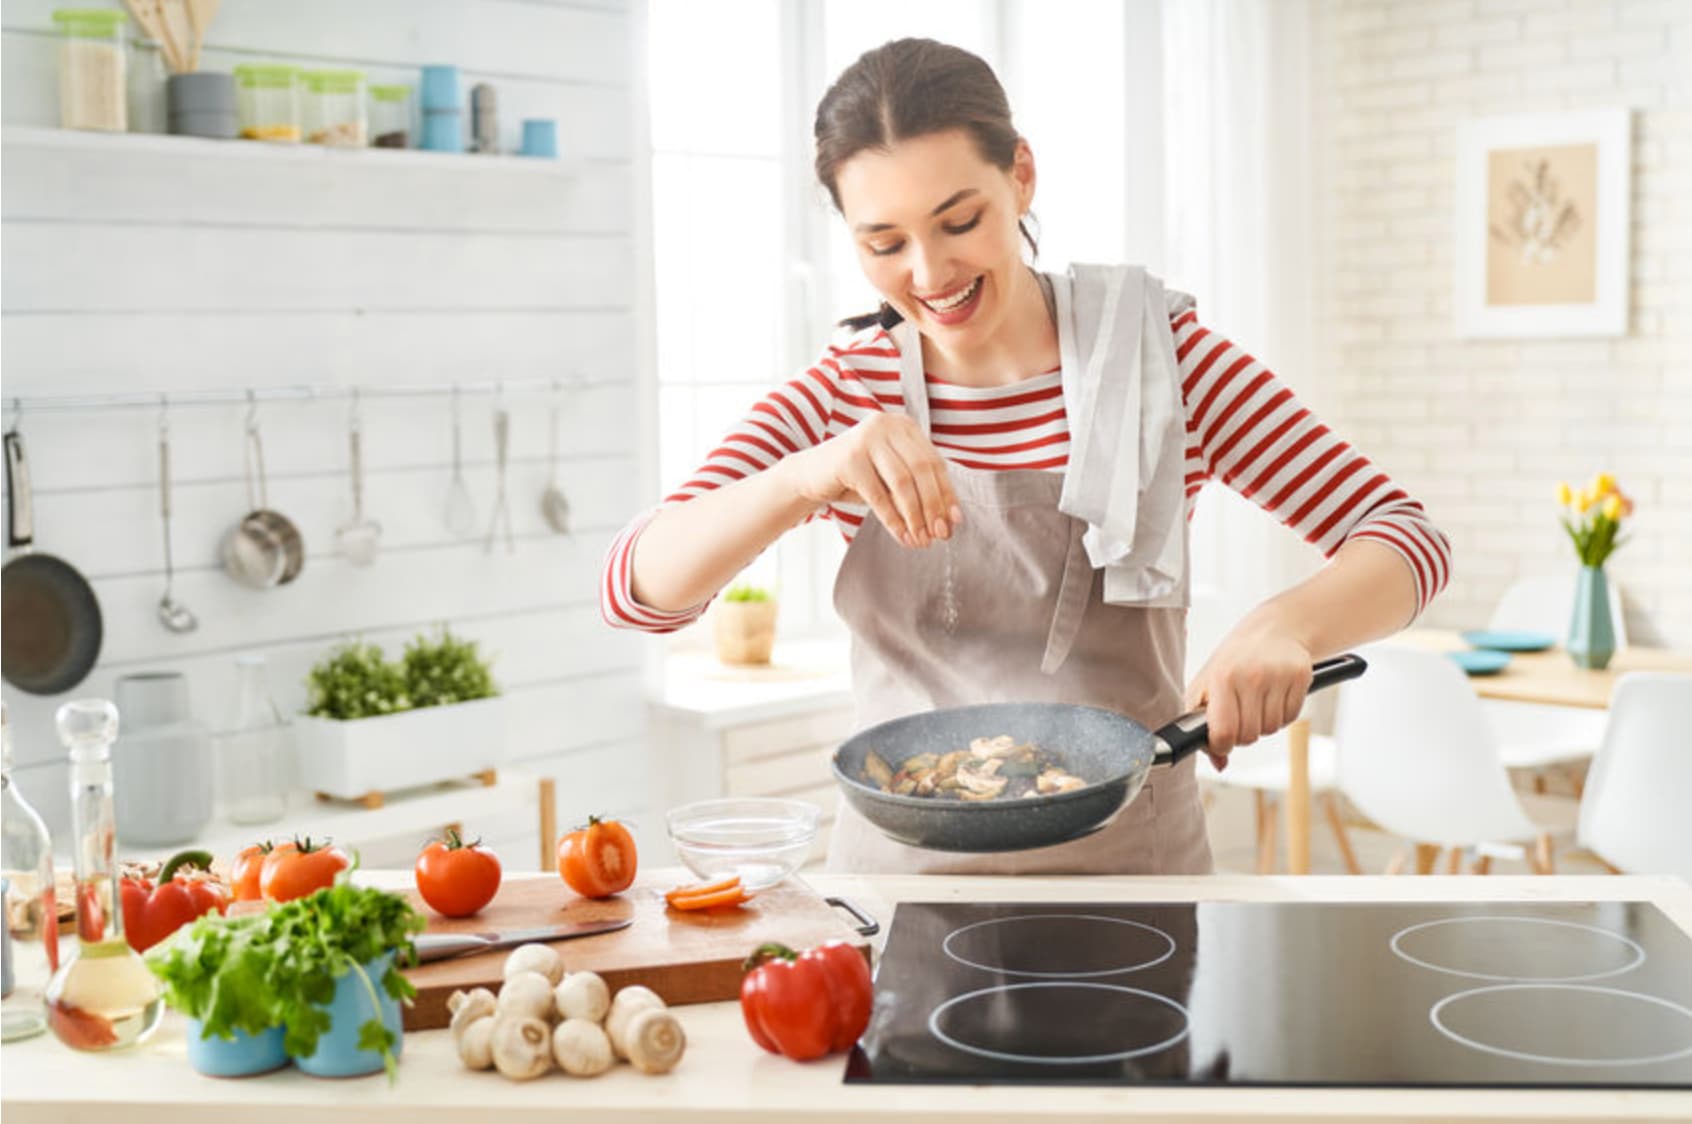 Kitchen Tips: Signs That Indicate To Throw Away Non-stick Pans